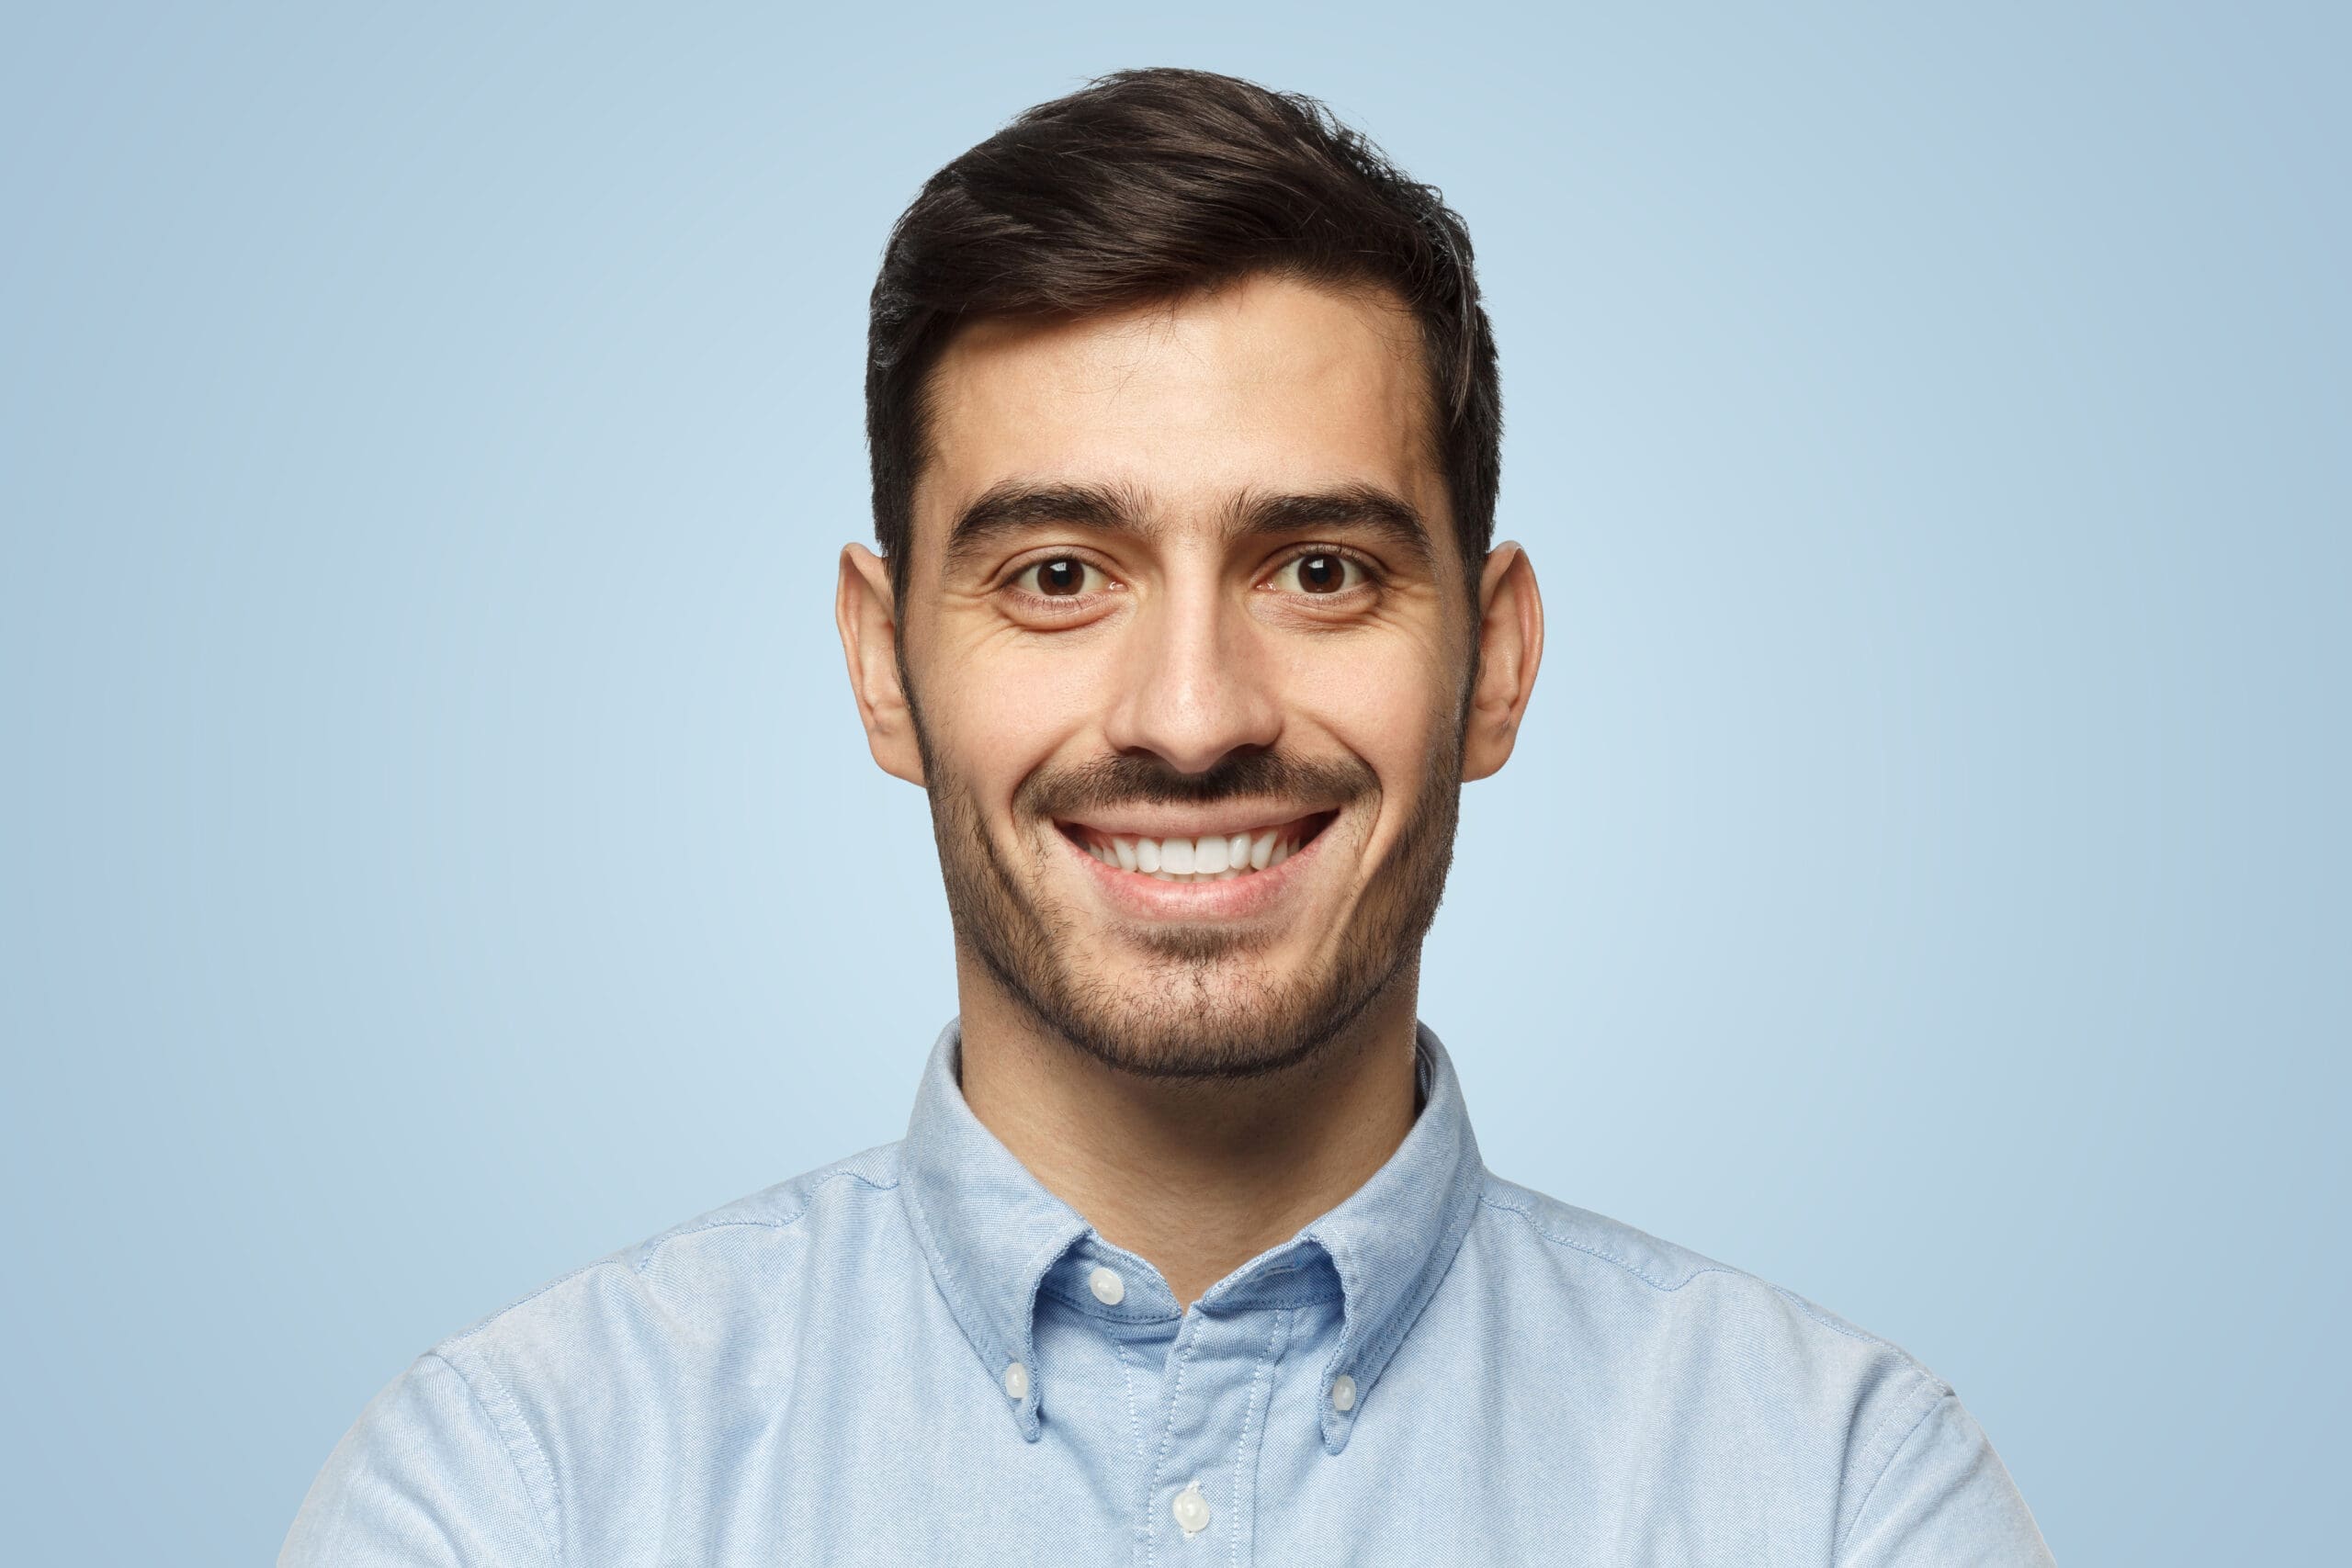 Closeup headshot of businessman standing against blue background, smiling with satisfaction and confidence